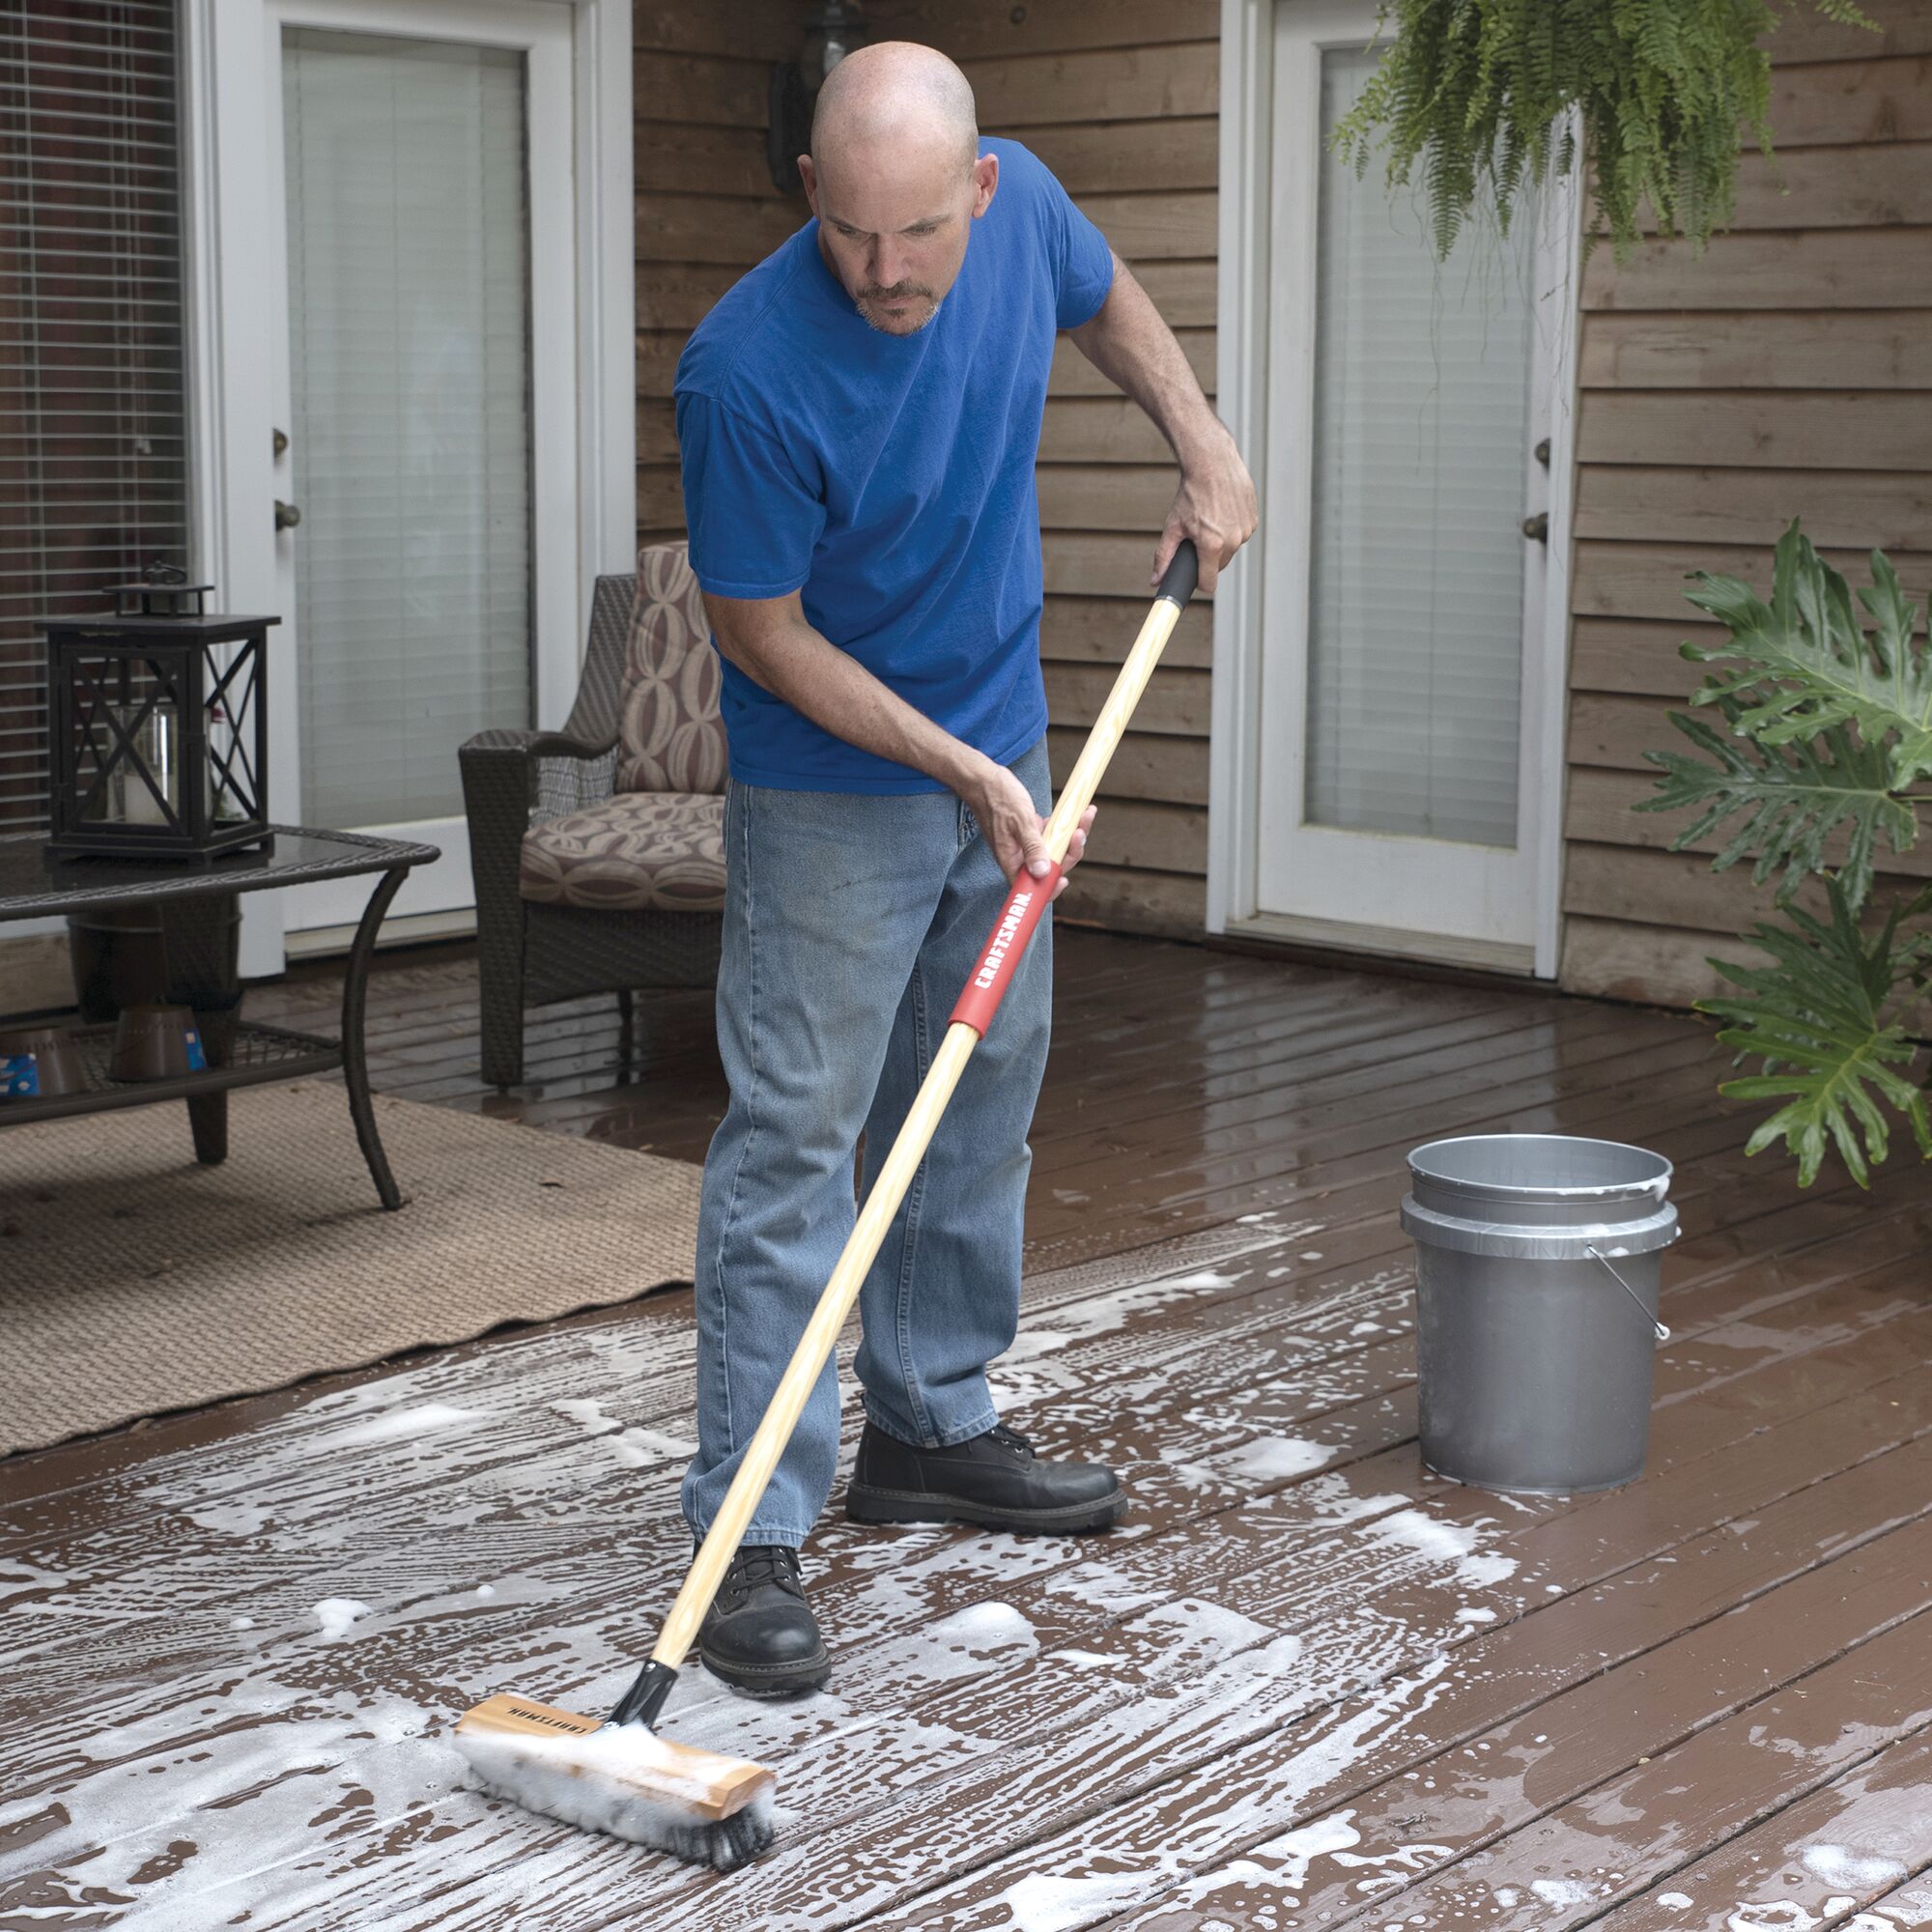 View of CRAFTSMAN 12-in Scrubbing Deck Brush being used by consumer